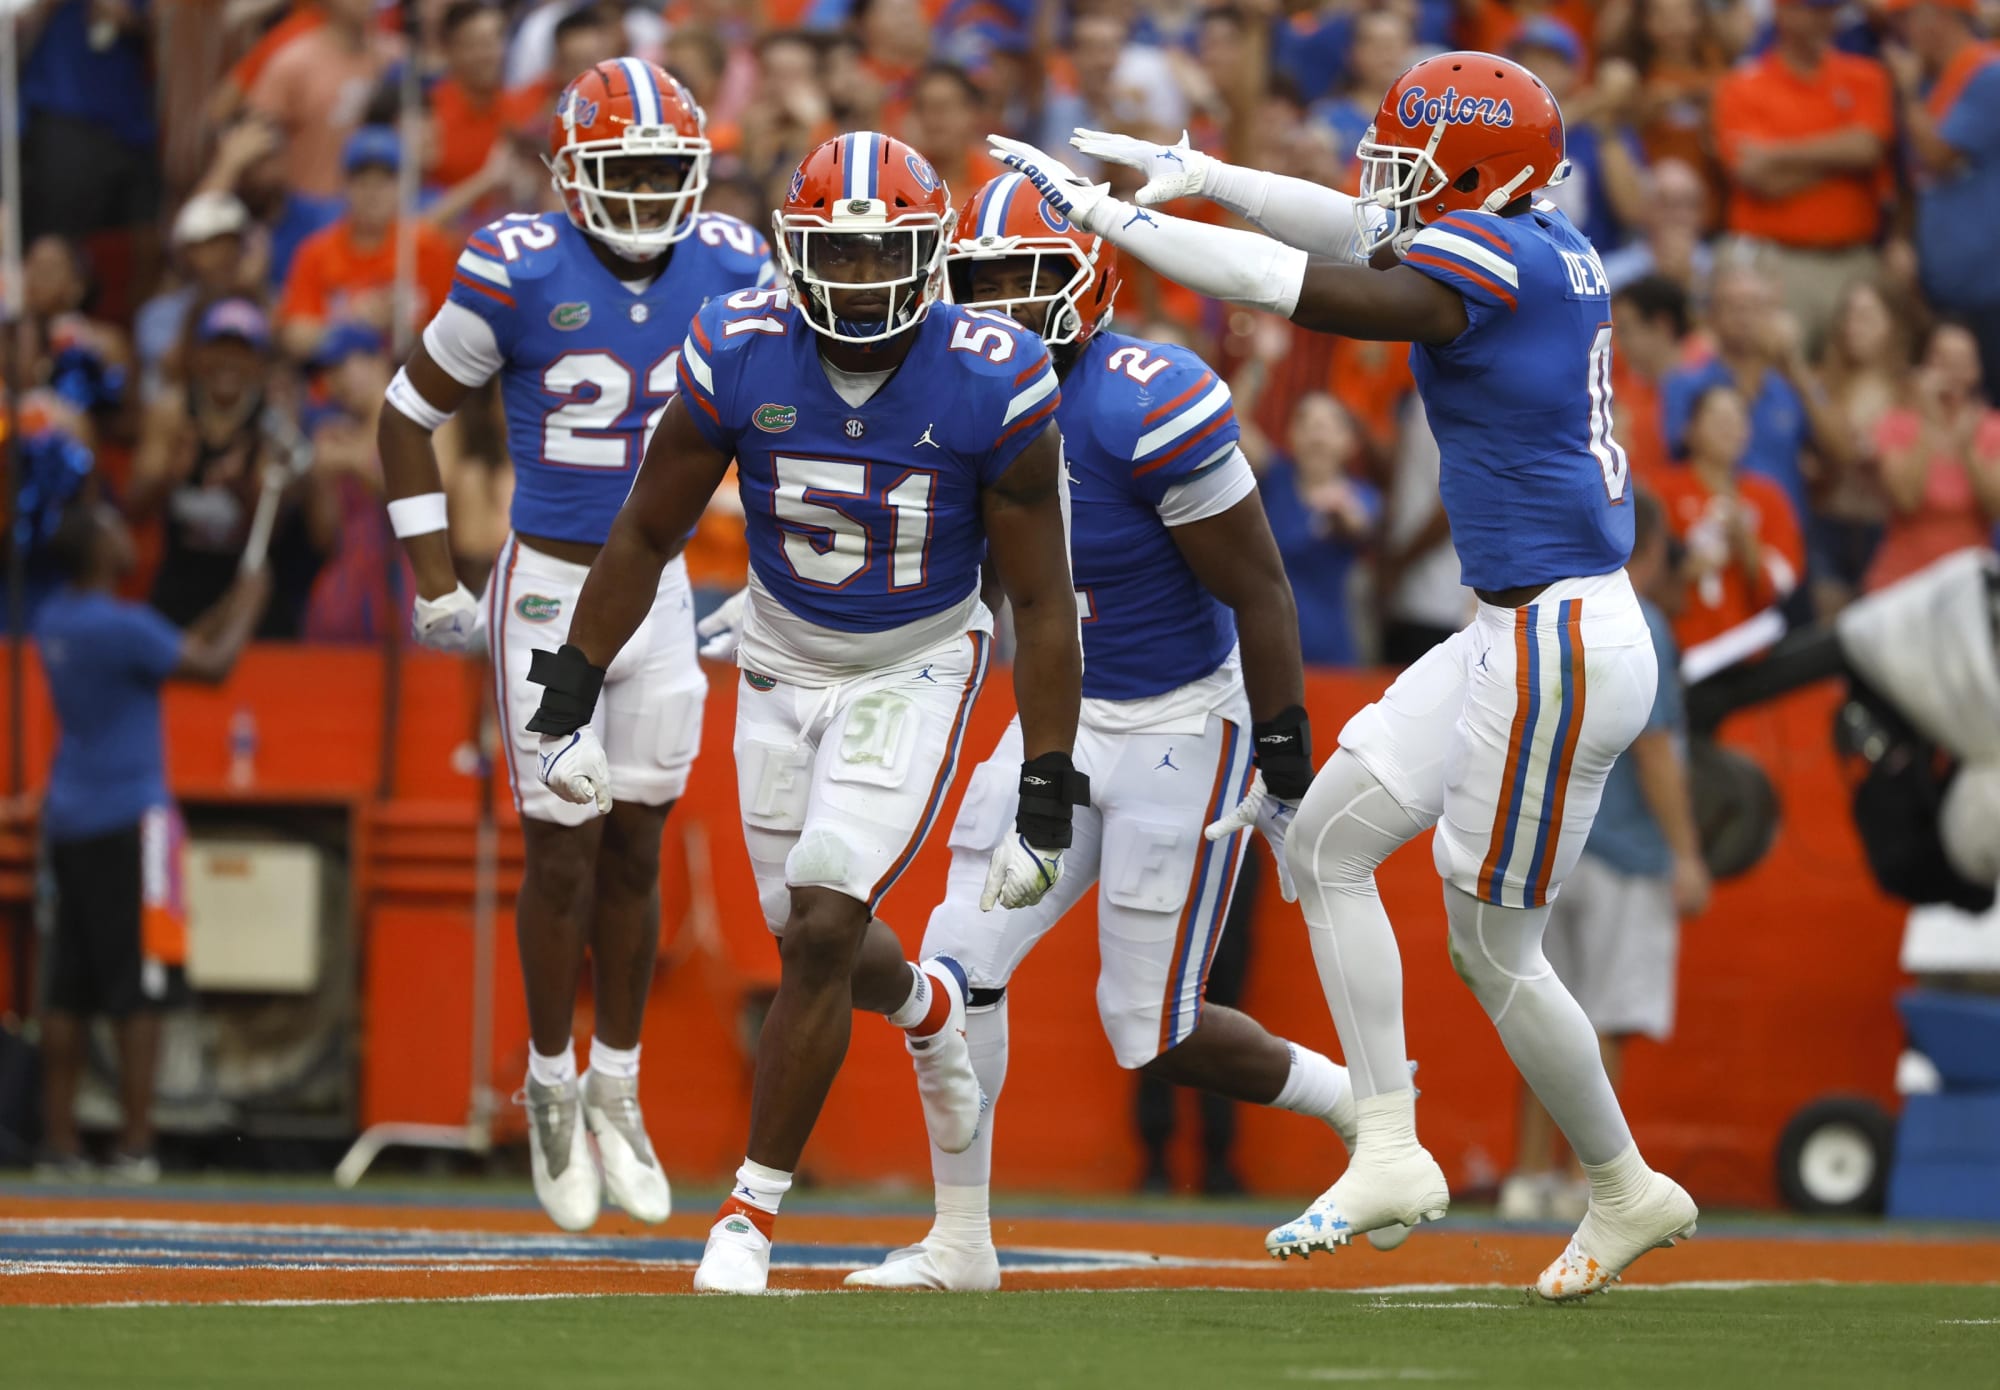 Florida football: Florida vs Tennessee best bets in week 4